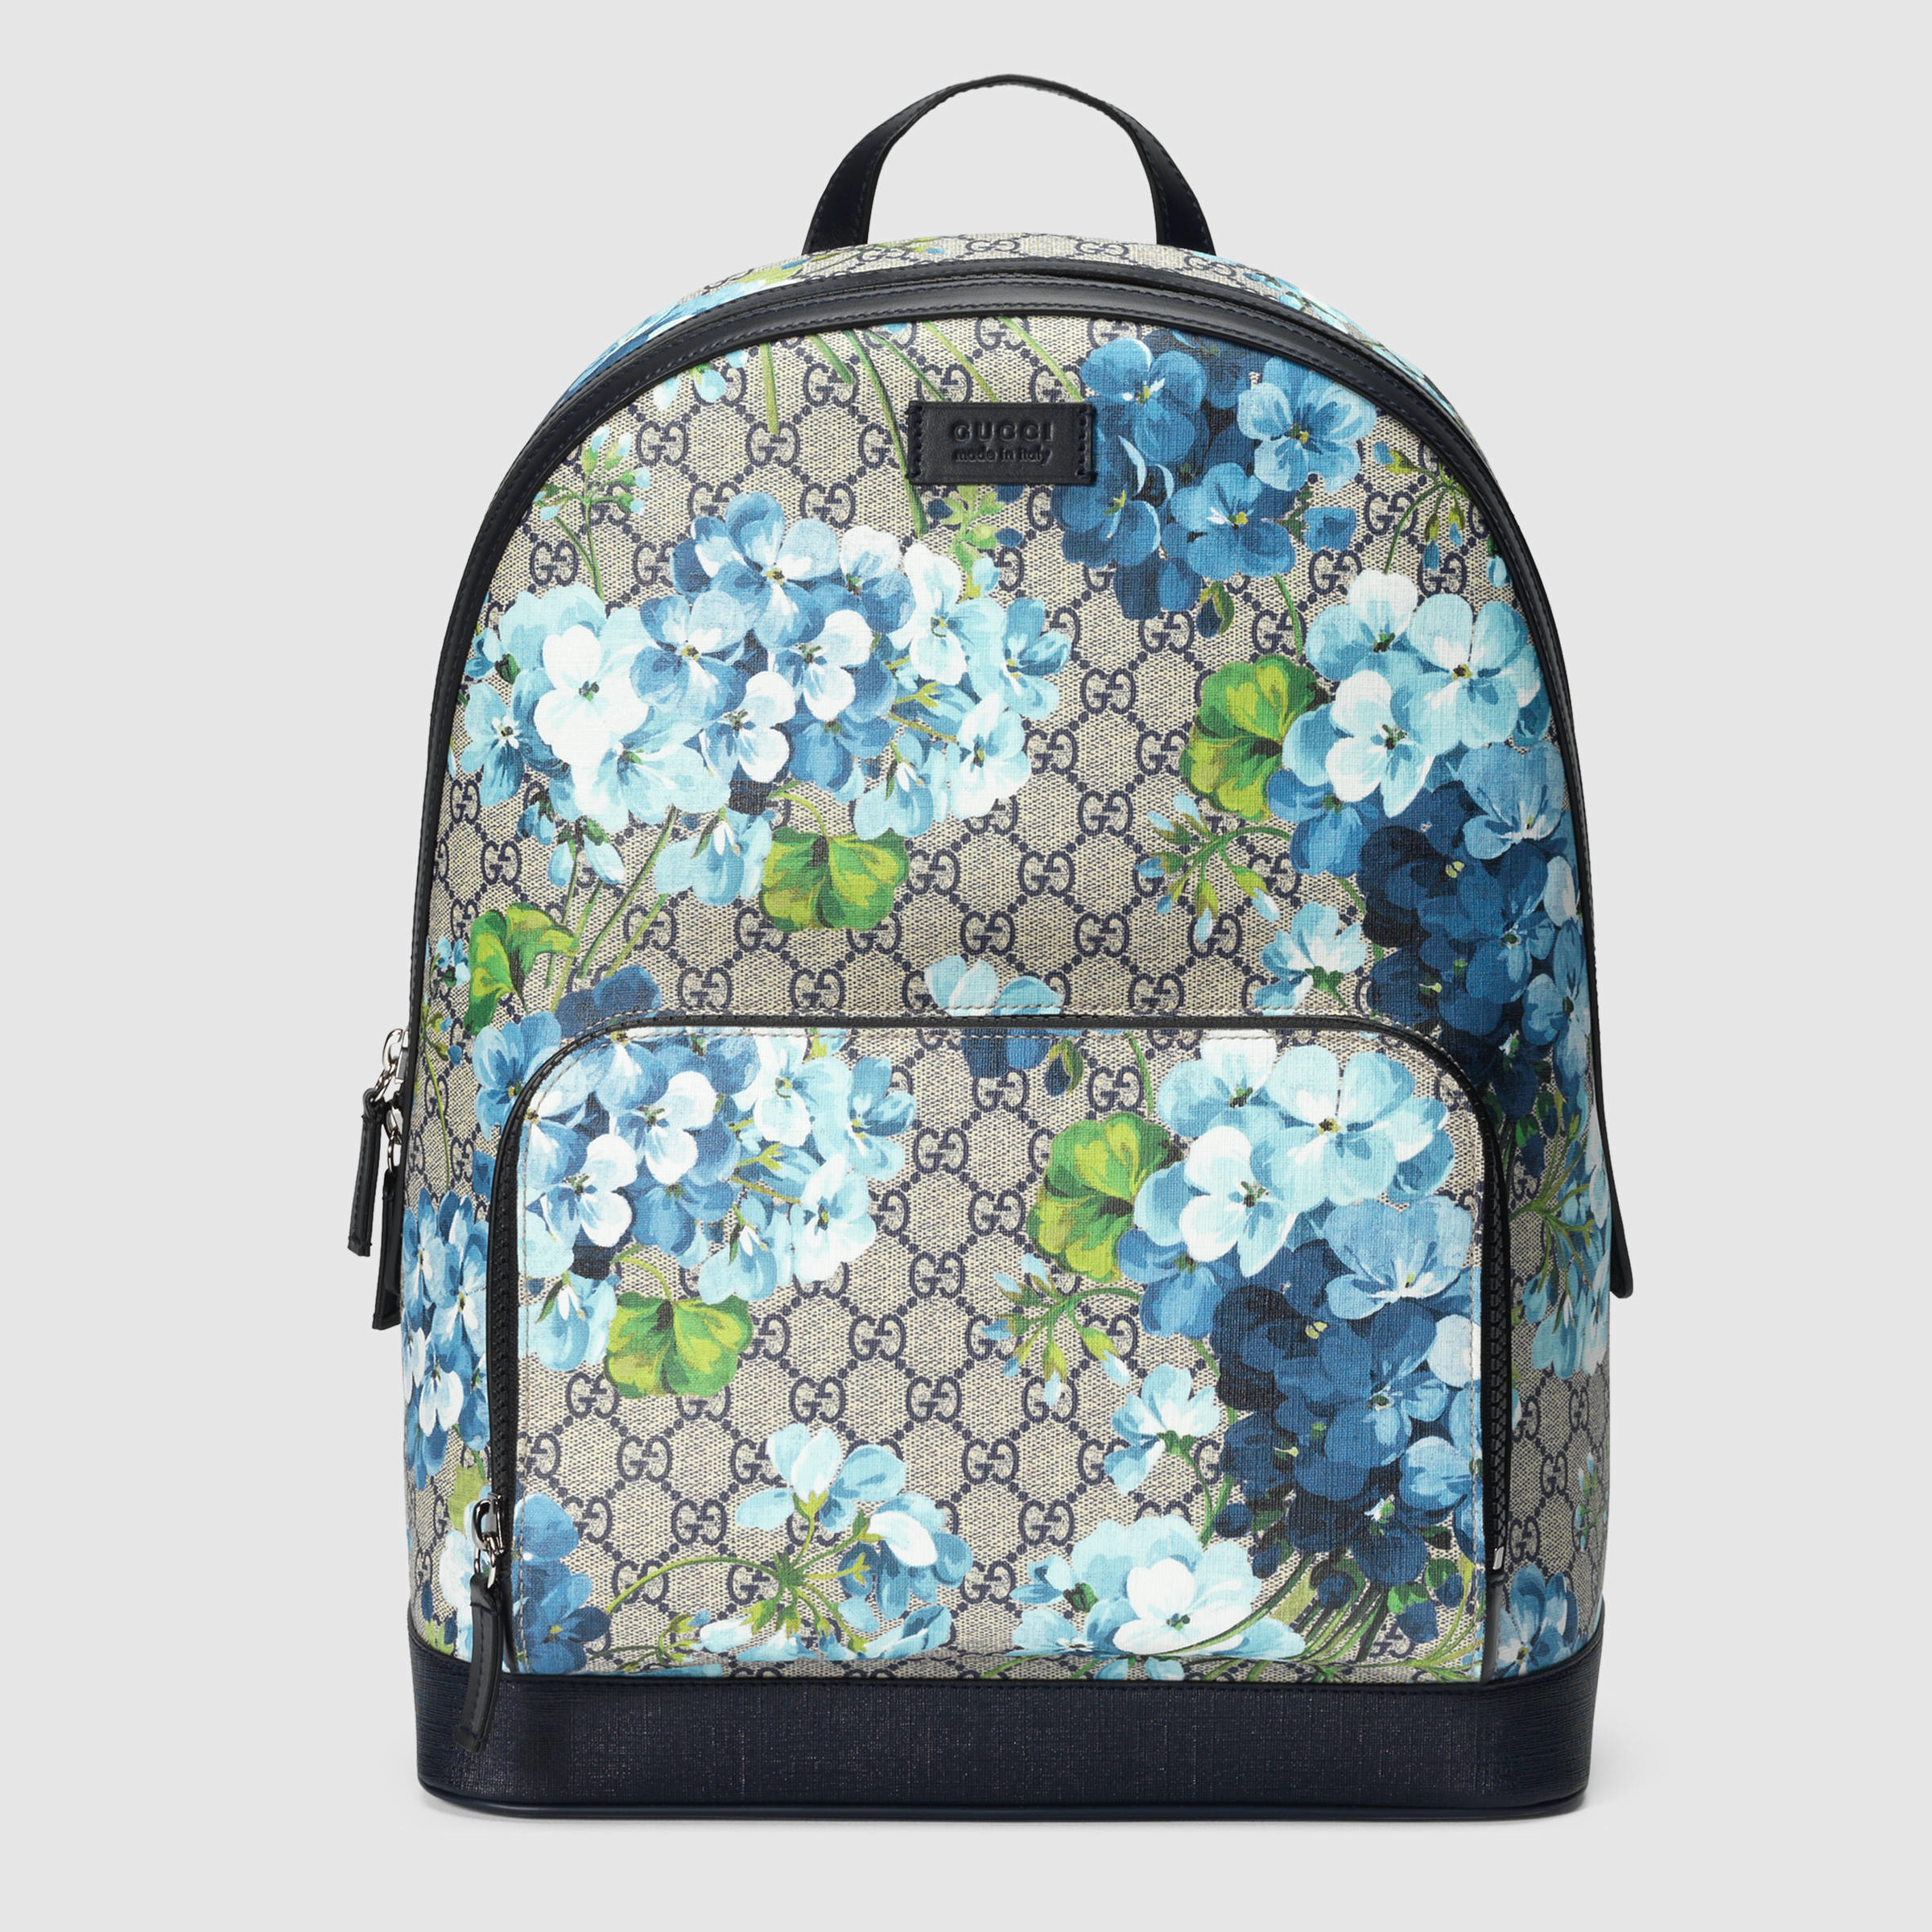 Gucci Gg Blooms Backpack in Multicolour (blooms print) | Lyst